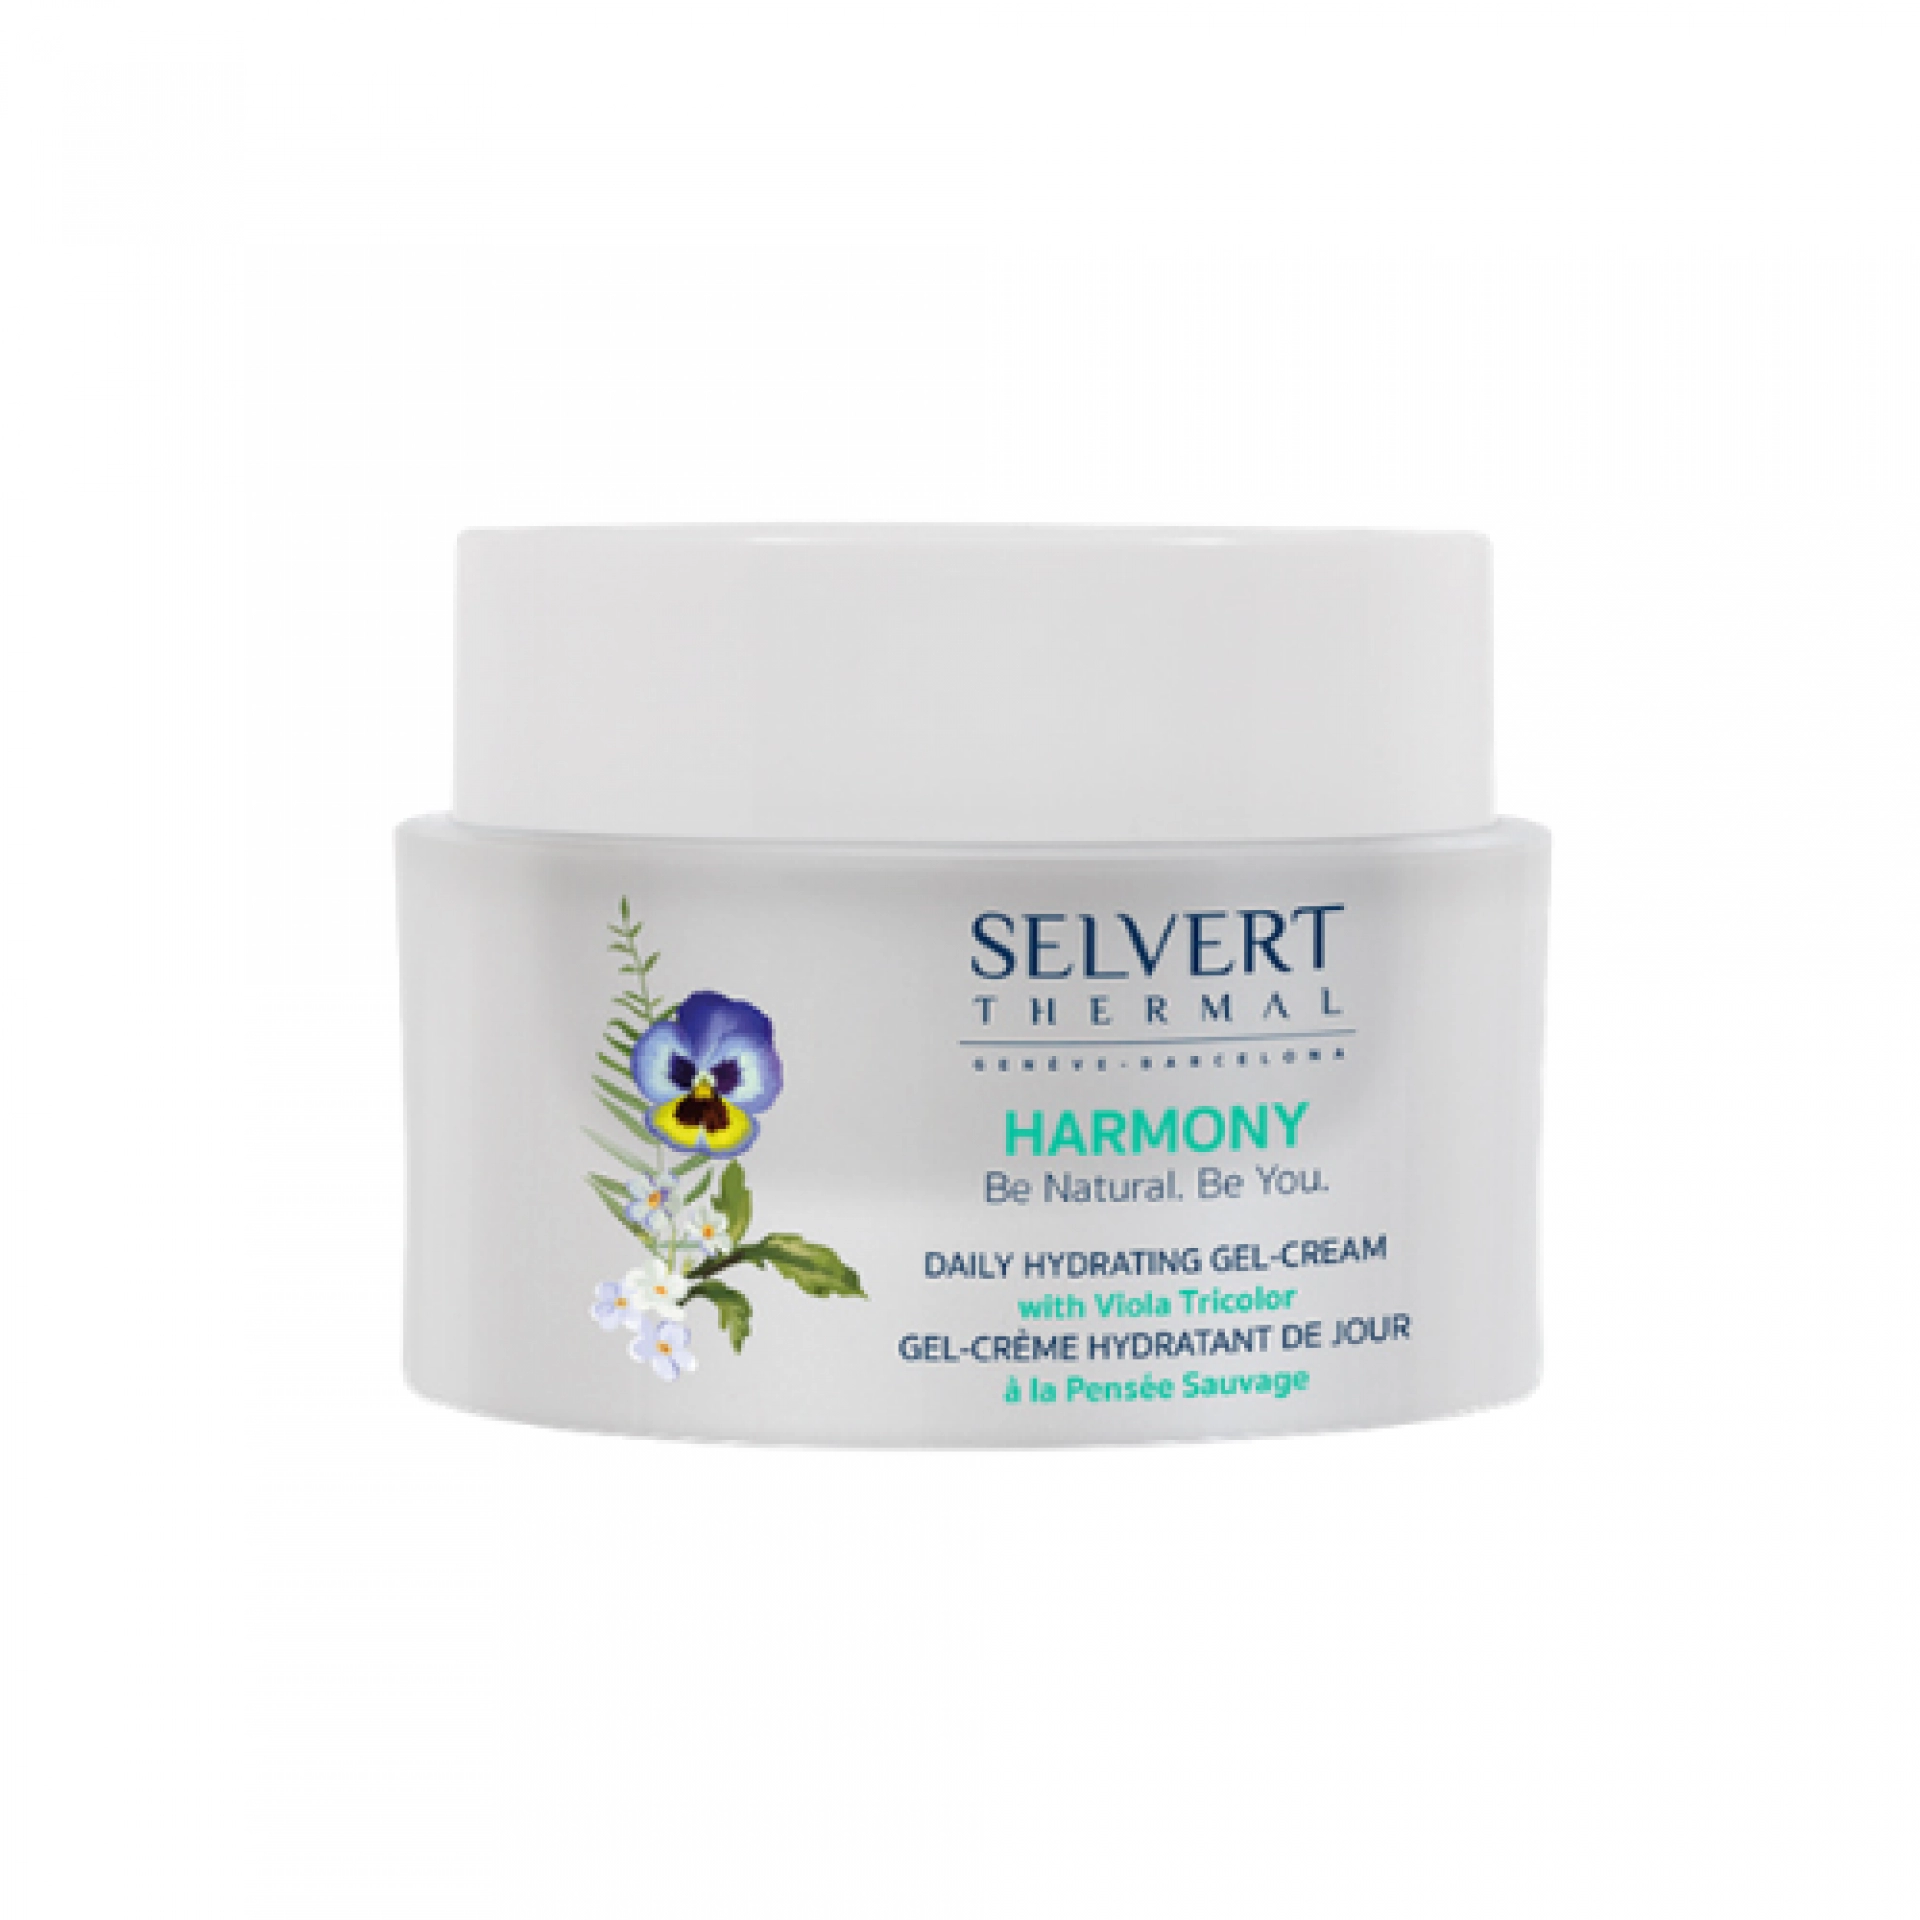 Daily Hydrating Gel-Cream with Viola Tricolor | Hidratante 50ml - Harmony - Selvert Thermal ®